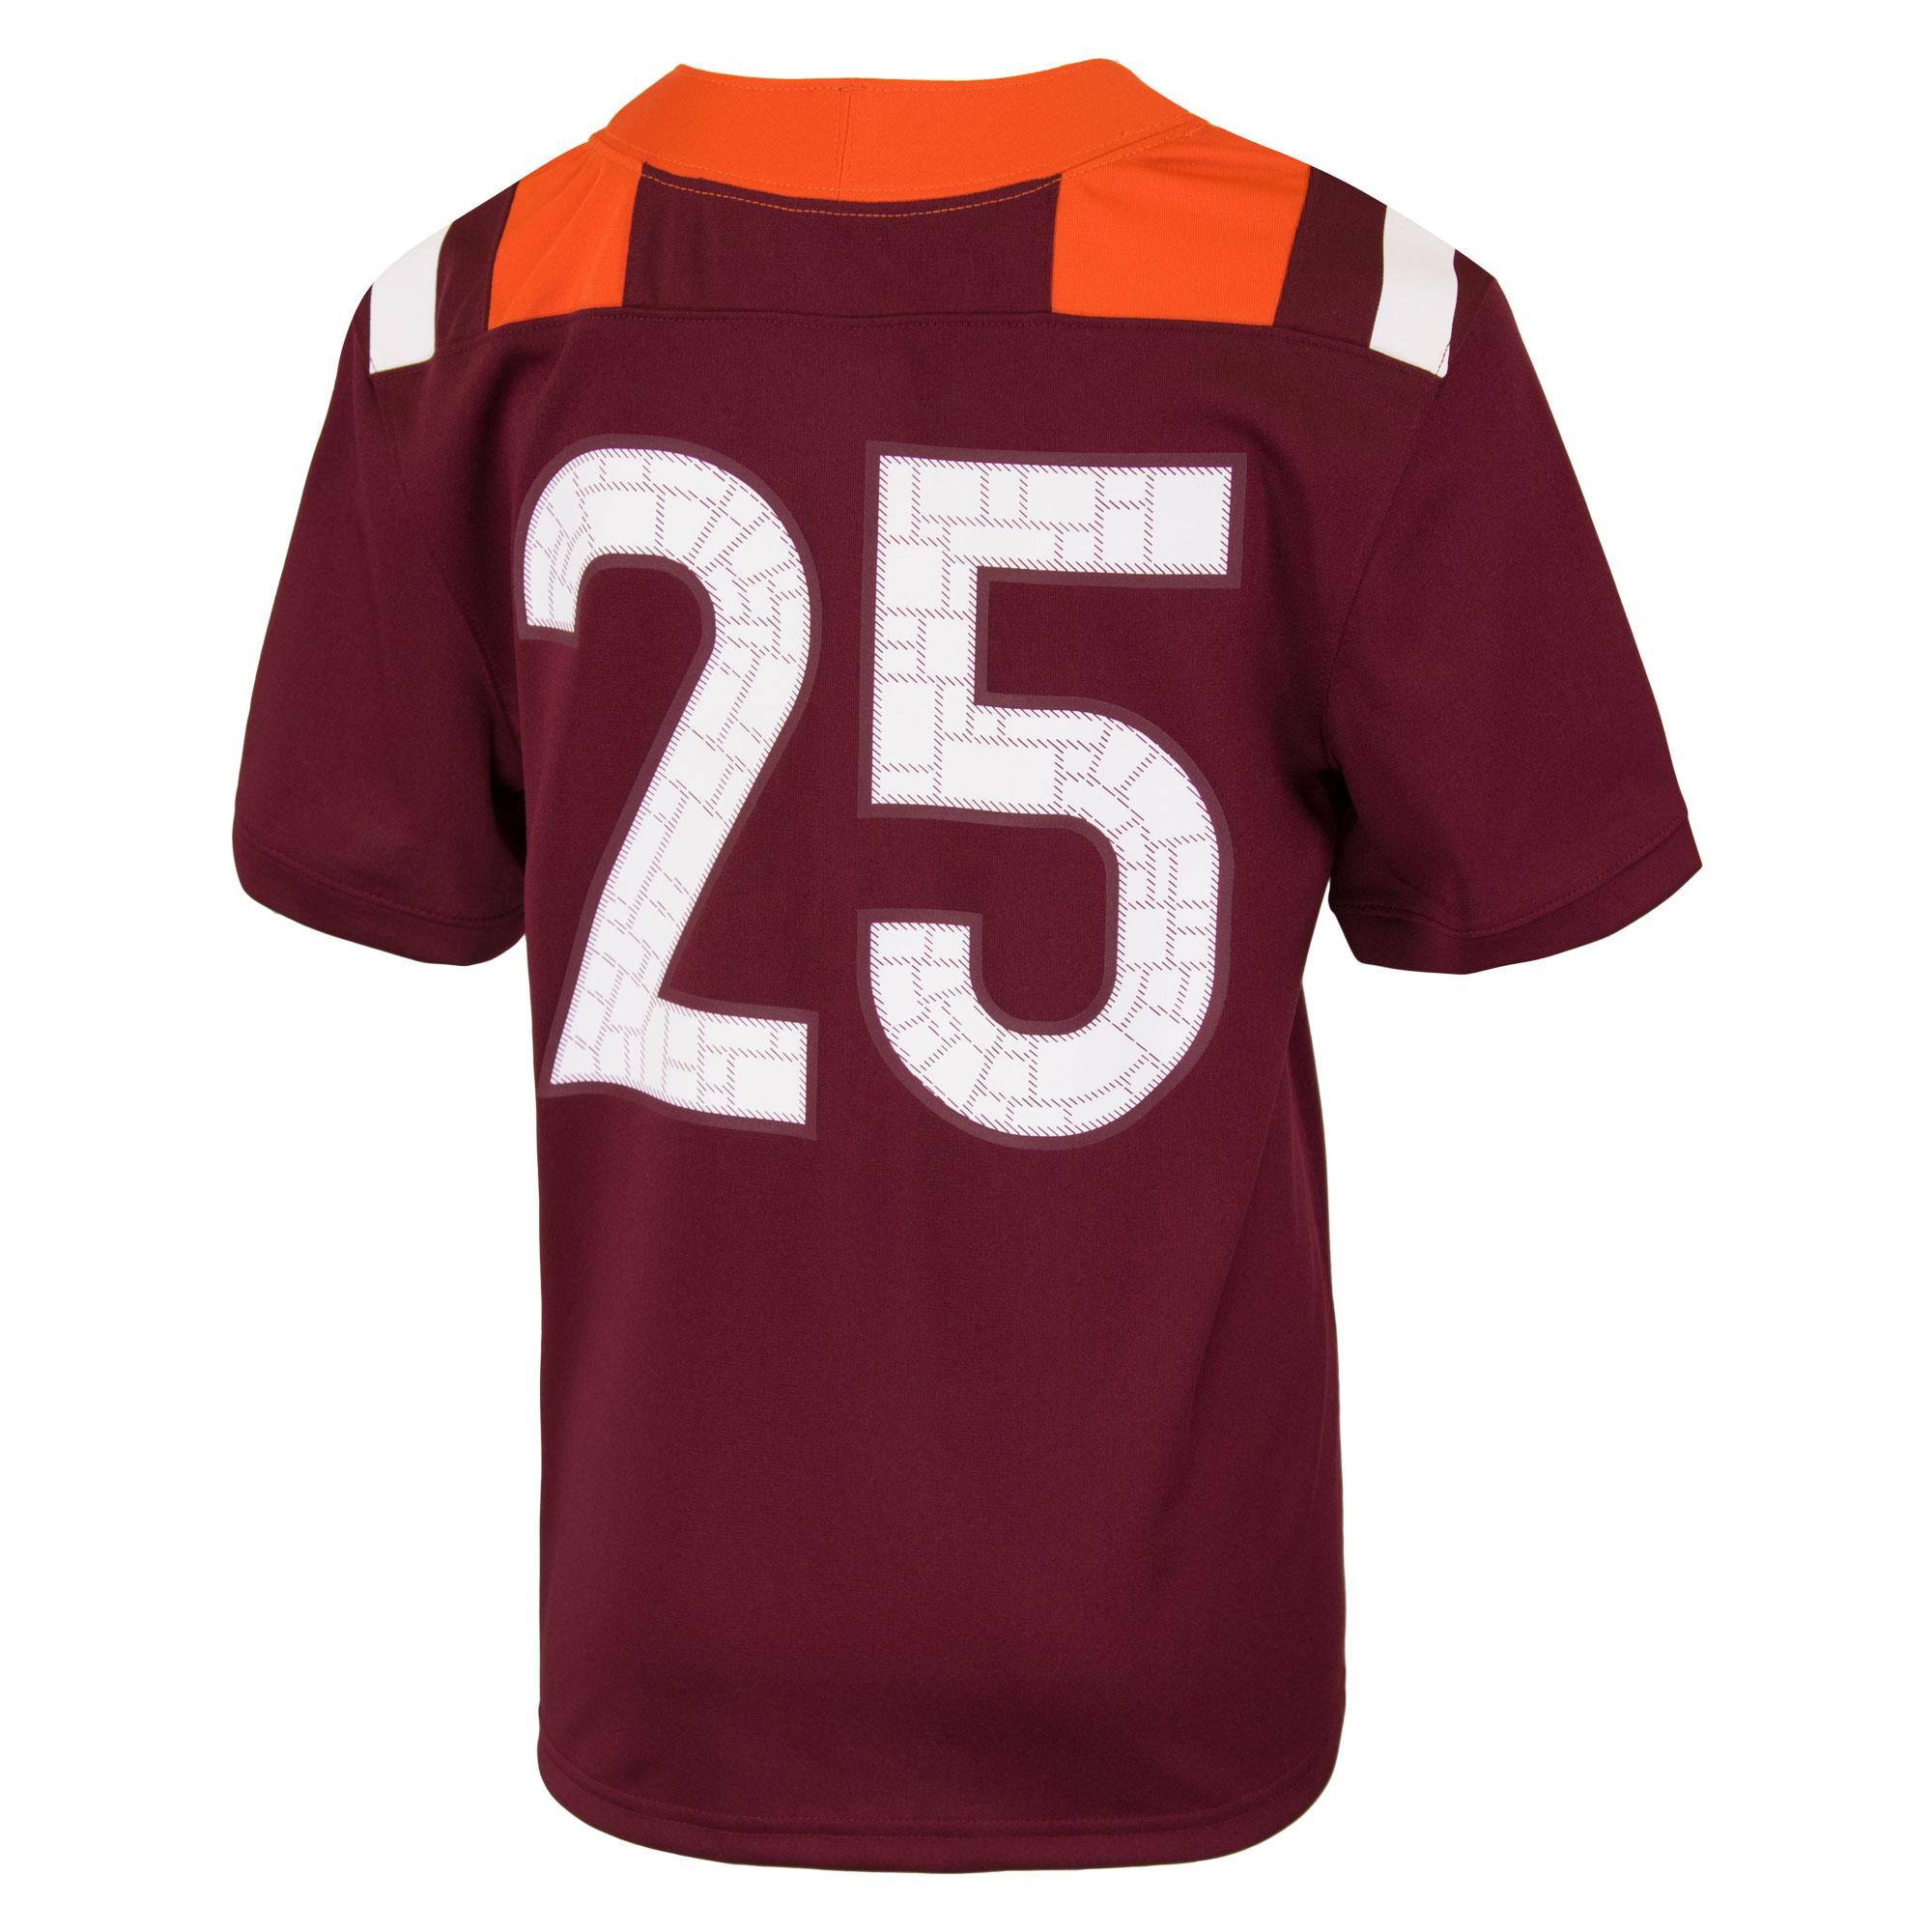 25 jersey number